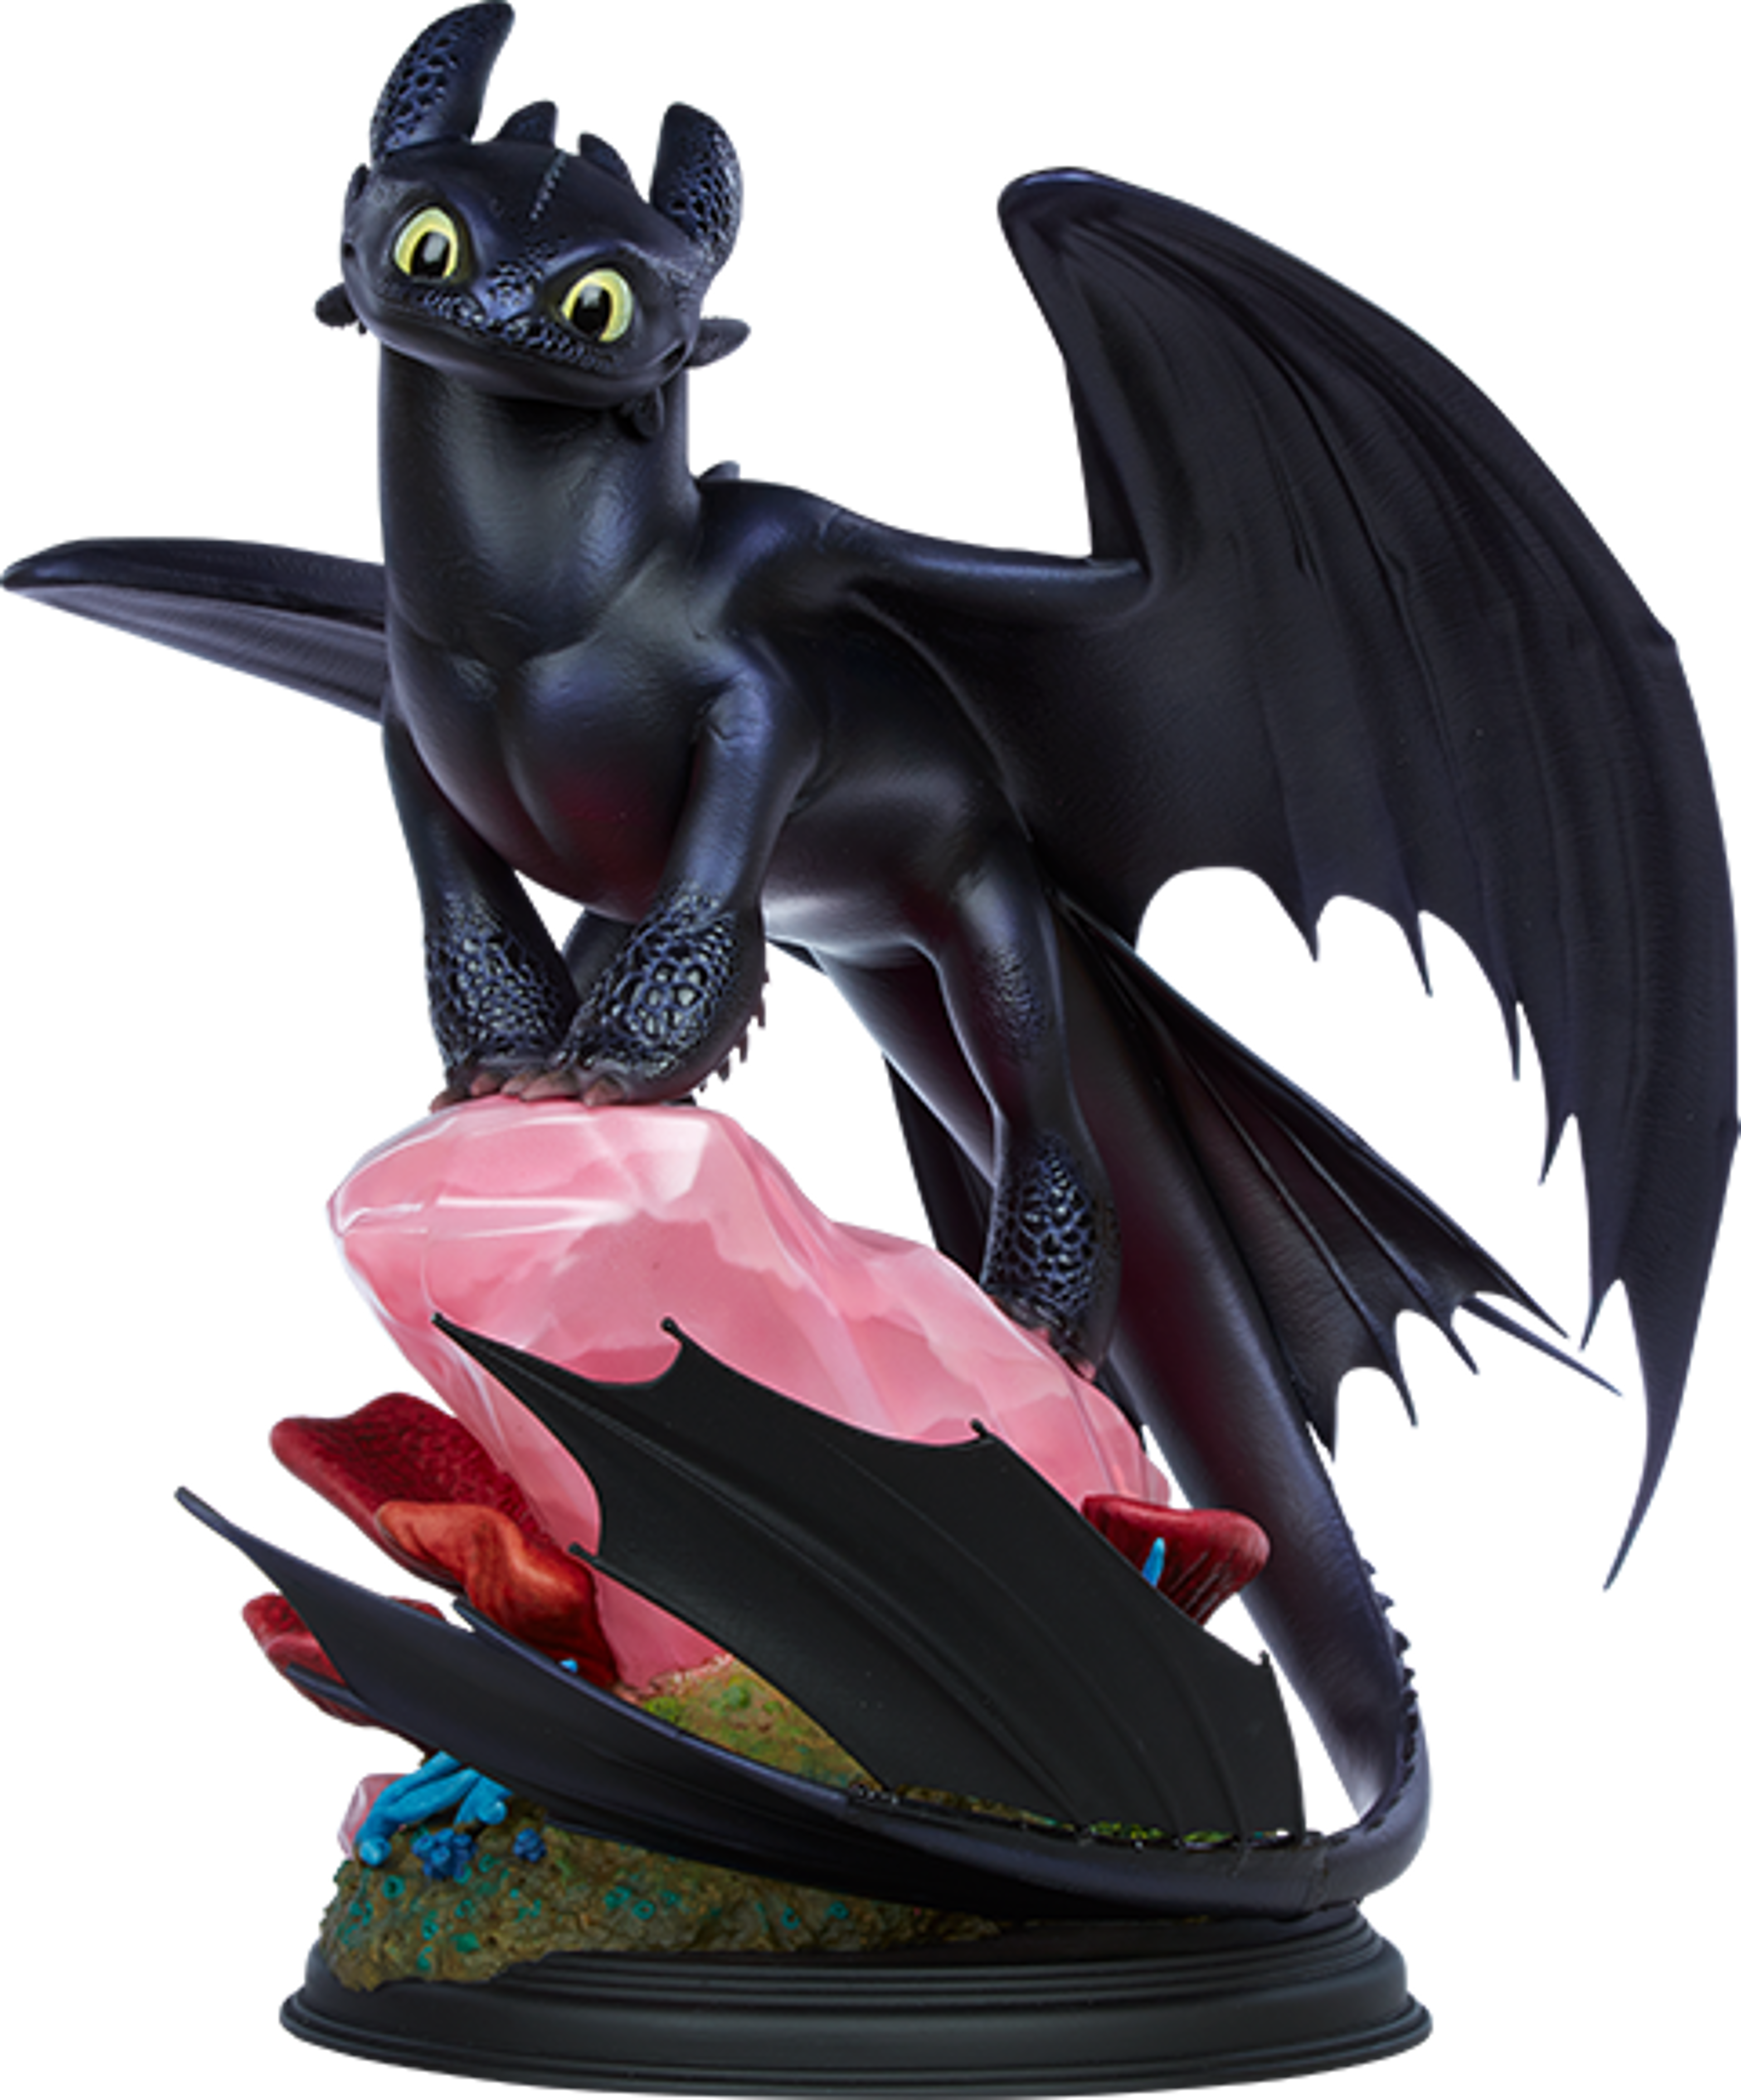 TOOTHLESS Statues by Sideshow Collectibles